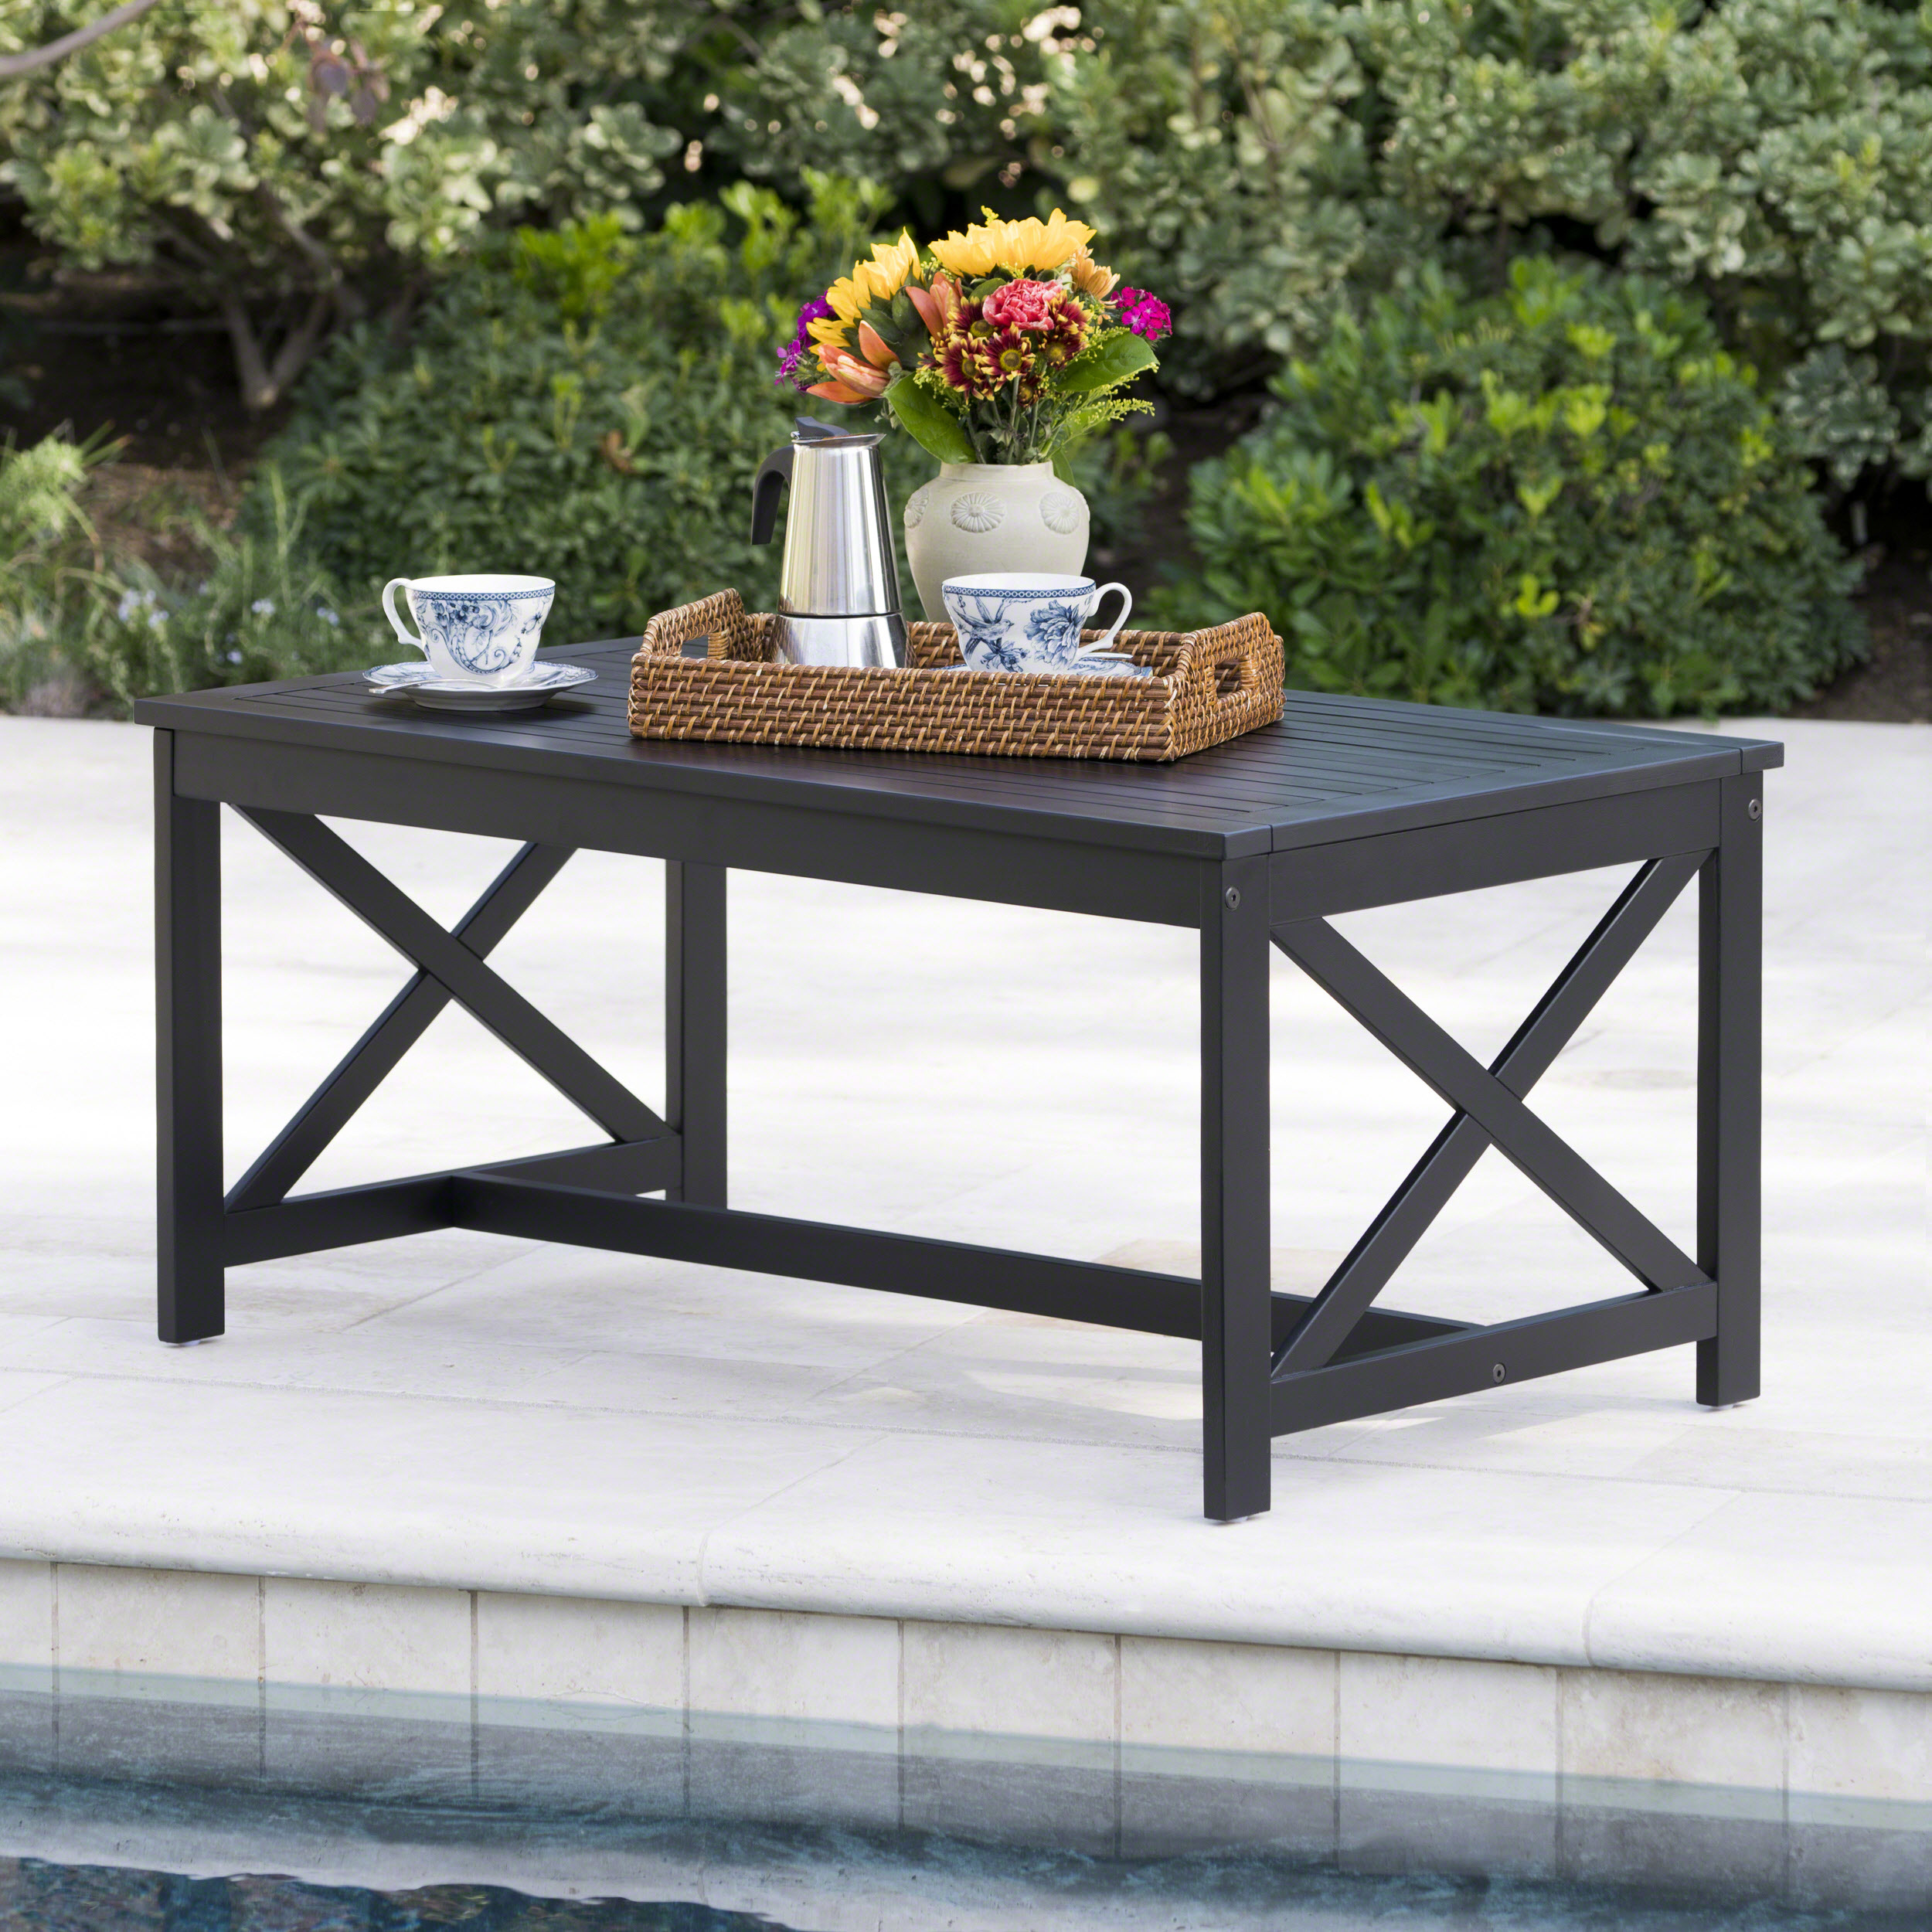 Ismus Outdoor Finished Acacia Wood Coffee Table - Black